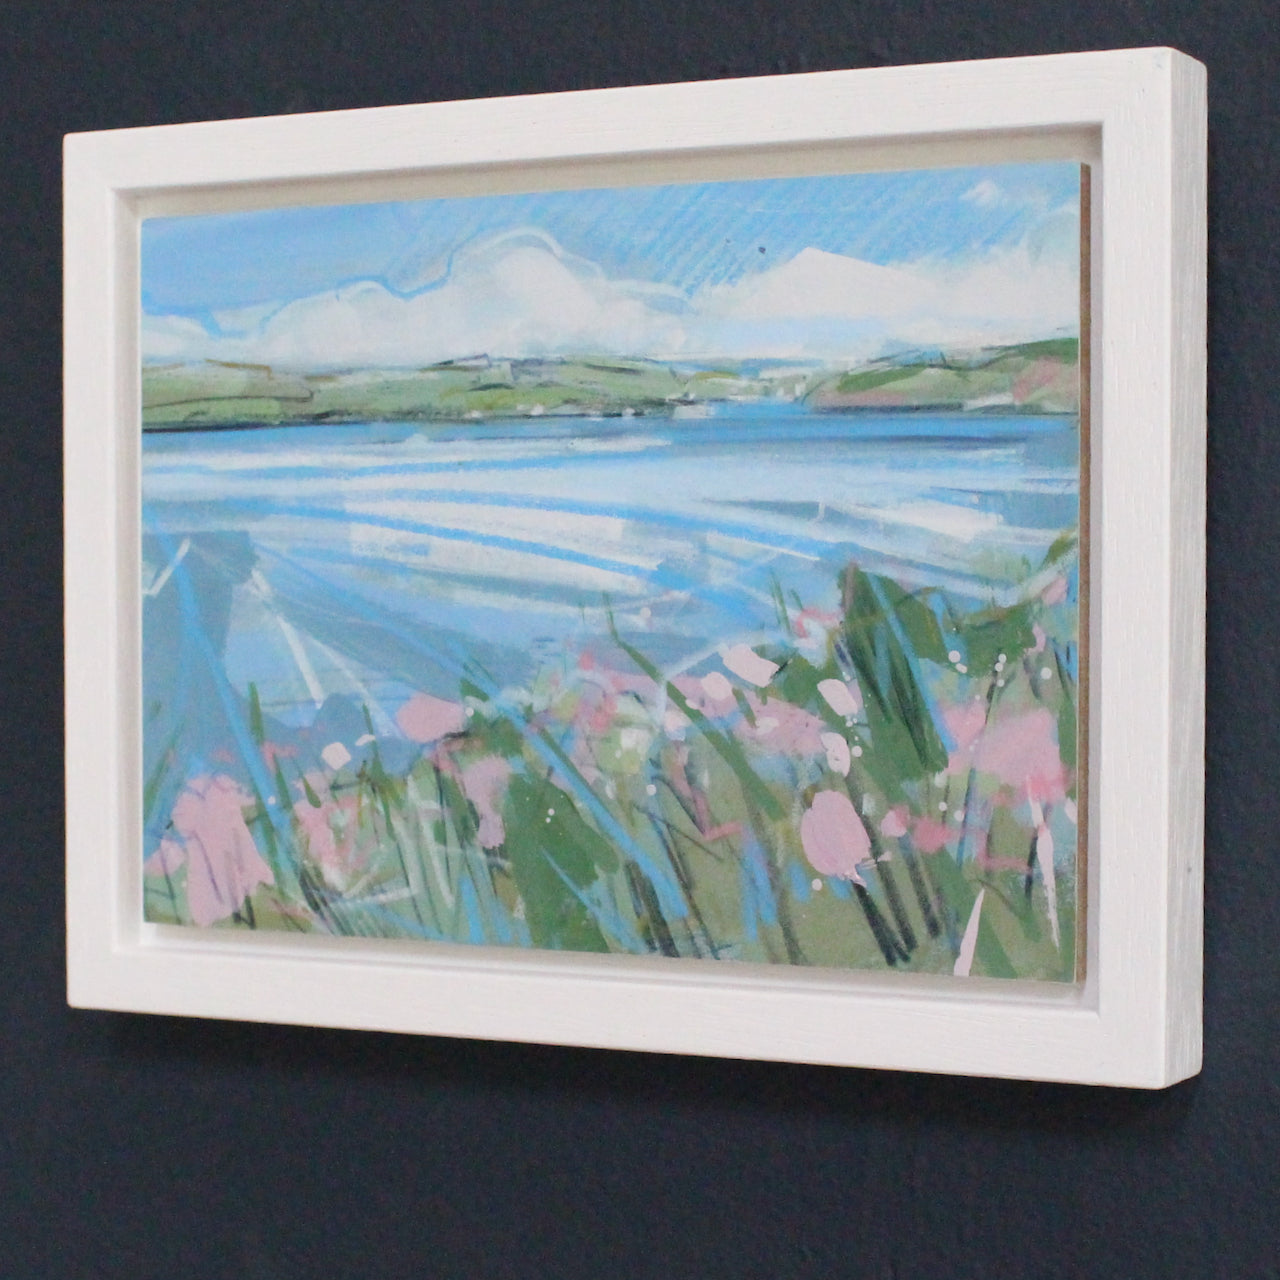 a small framed painting by Imogen Bone,  of river with green hills, pale blue river and pink flowers on the riverbank.